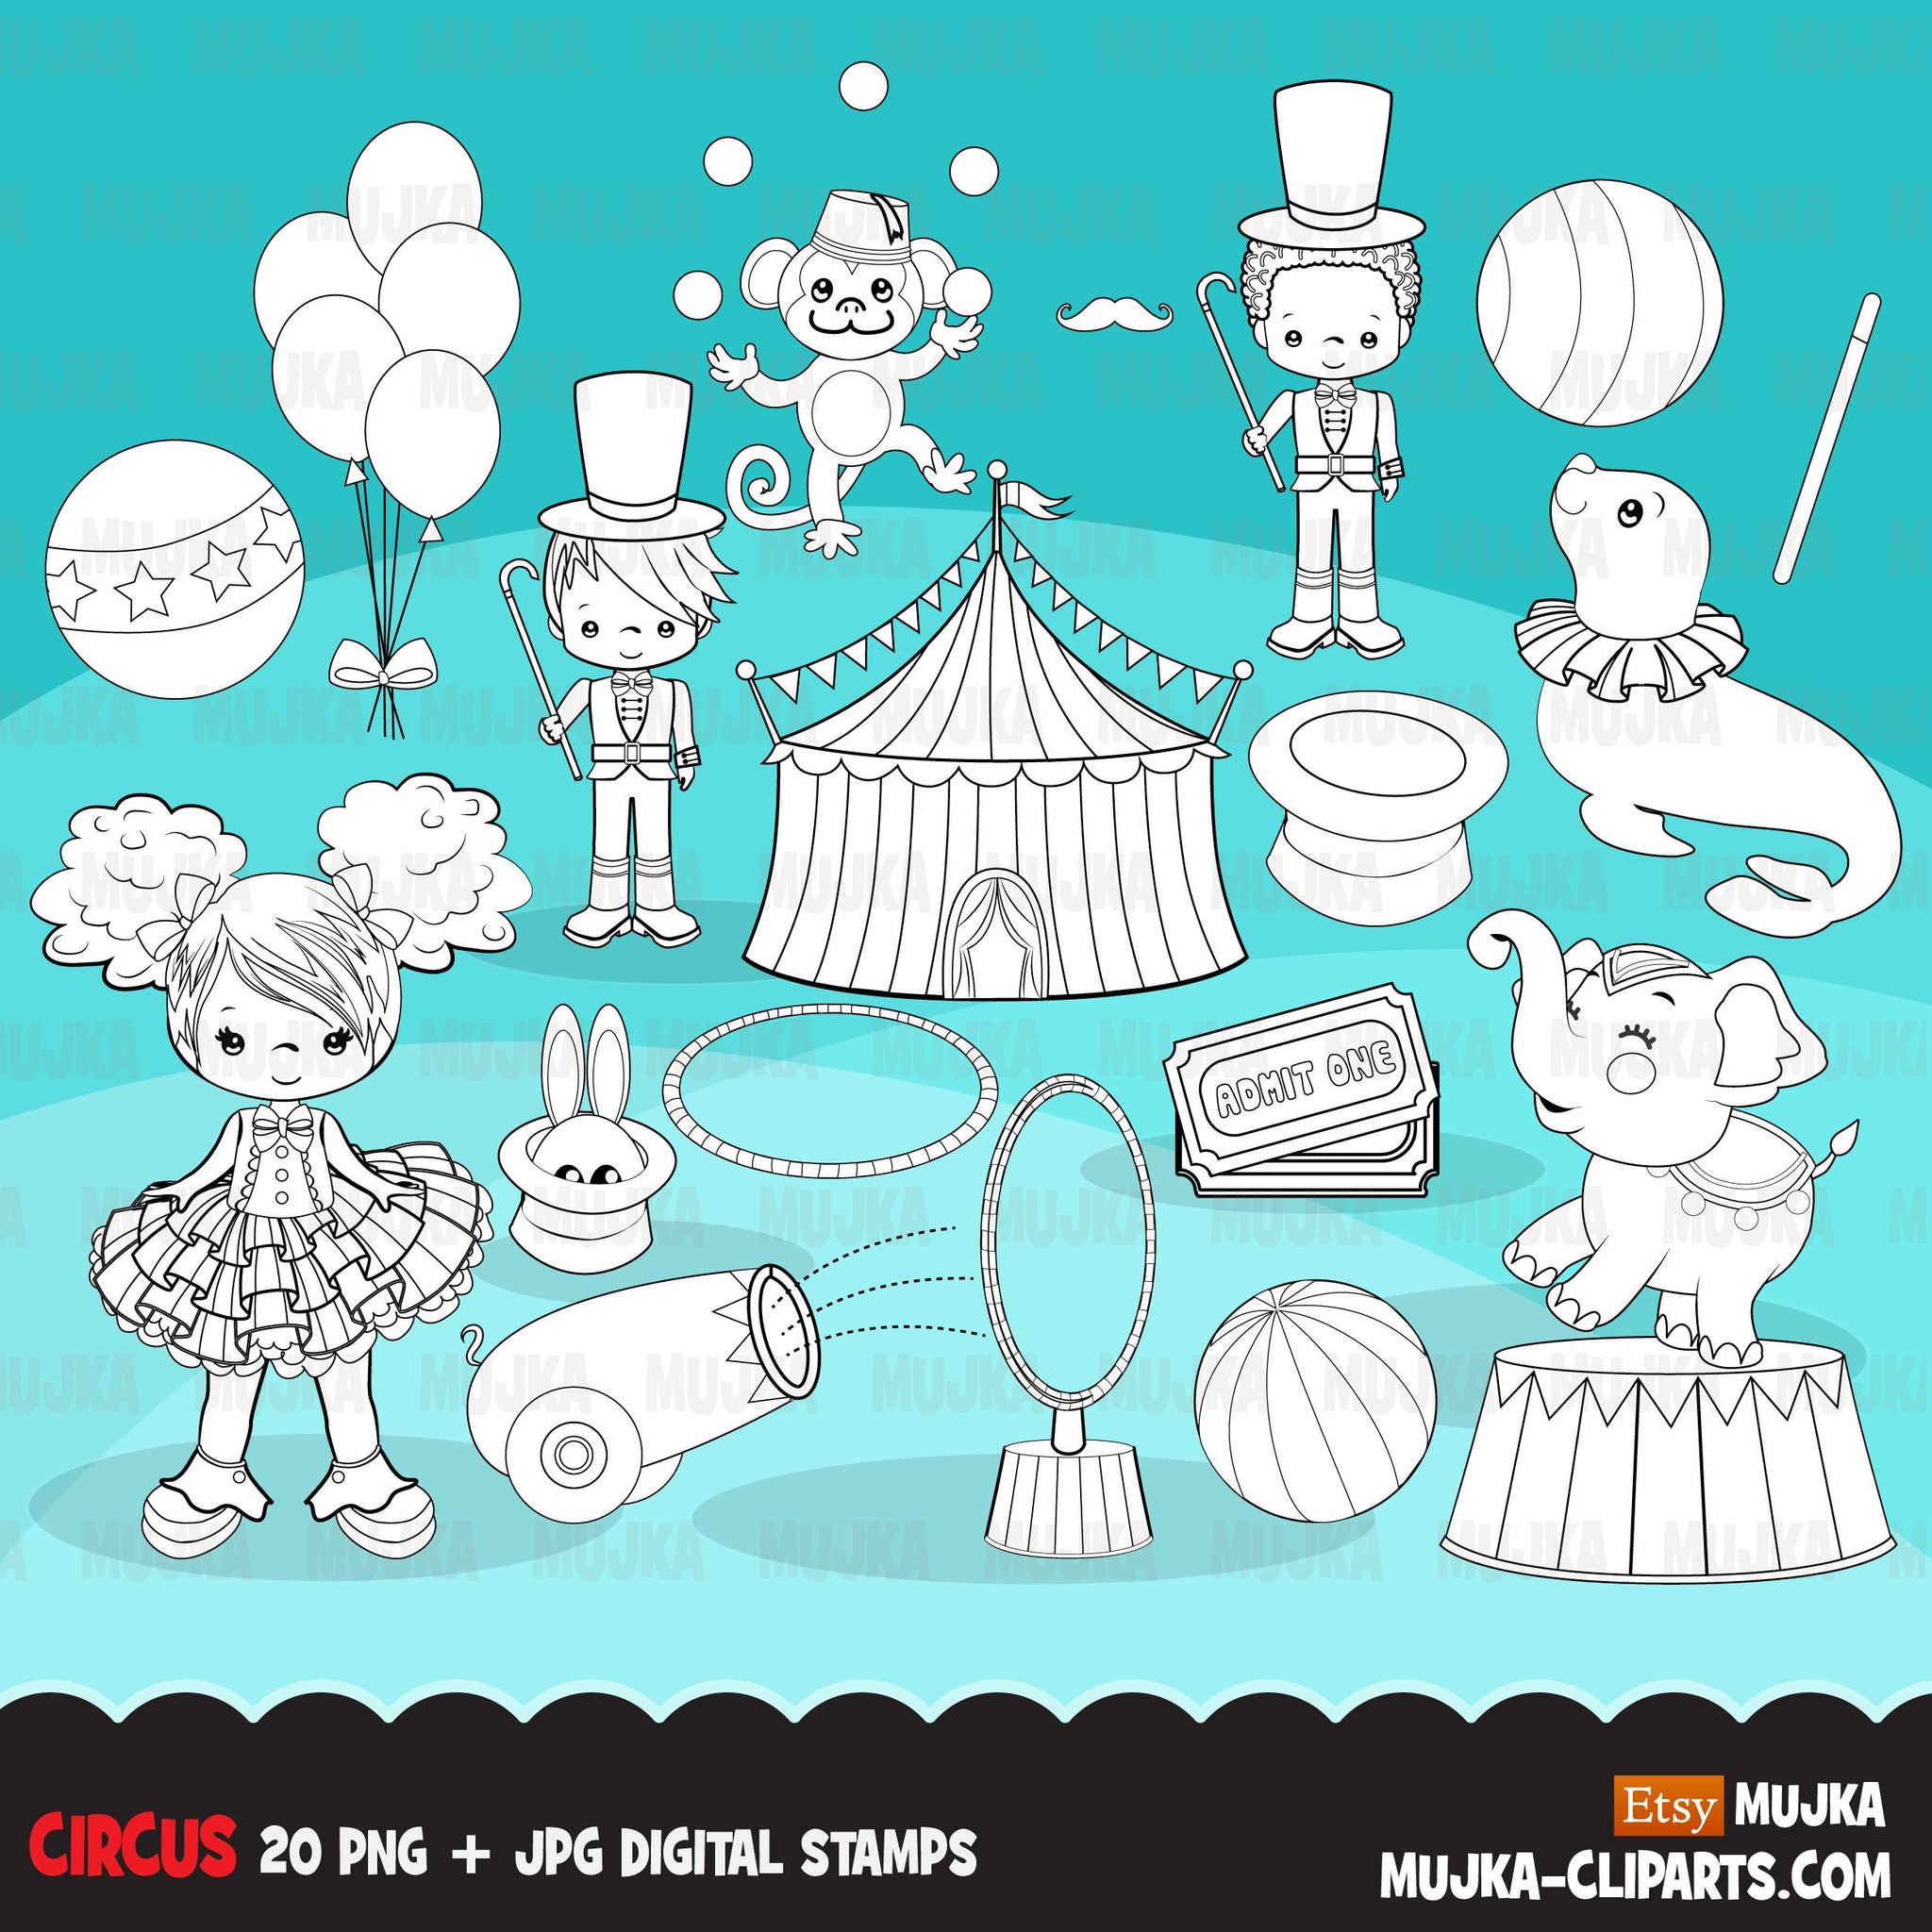 Circus Digital Stamps Big top carnival graphics, amusement park, elephant, monkey, magic show, birthday party, B&W clip art outline